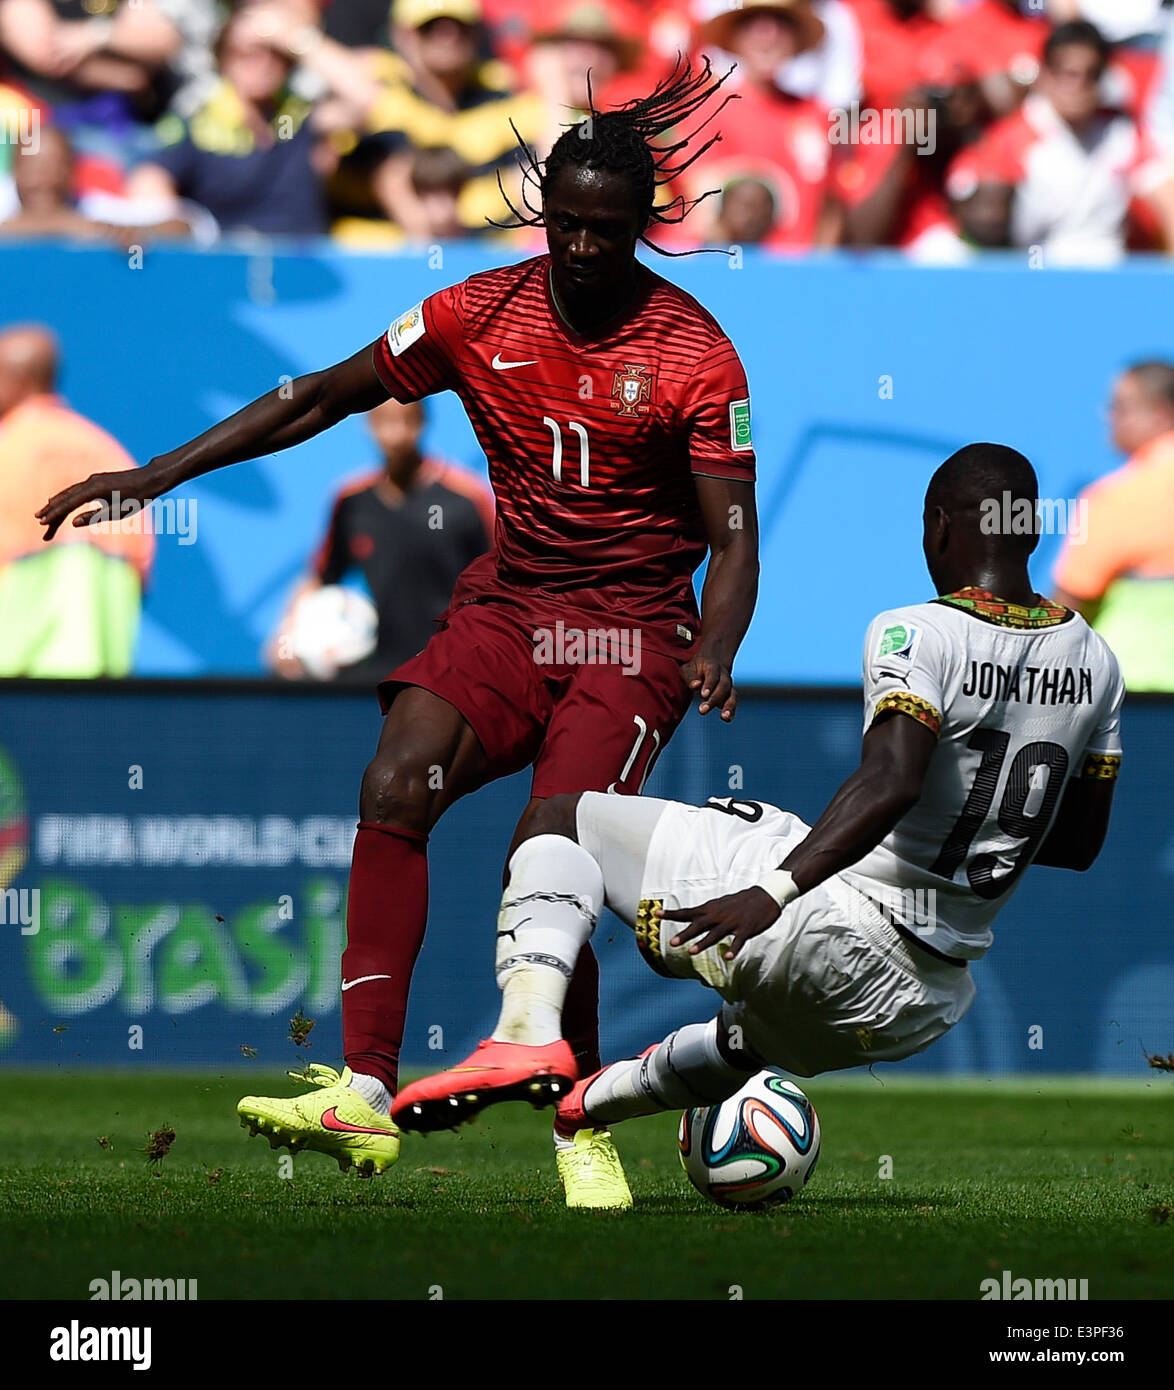 Brasilia, Brazil. 26th June, 2014. Portugal's Eder (L) competes with Ghana's Jonathan Mensah during a Group G match between Portugal and Ghana of 2014 FIFA World Cup at the Estadio Nacional Stadium in Brasilia, Brazil, June 26, 2014. Portugal won 2-1 over Ghana on Thursday. © Qi Heng/Xinhua/Alamy Live News Stock Photo